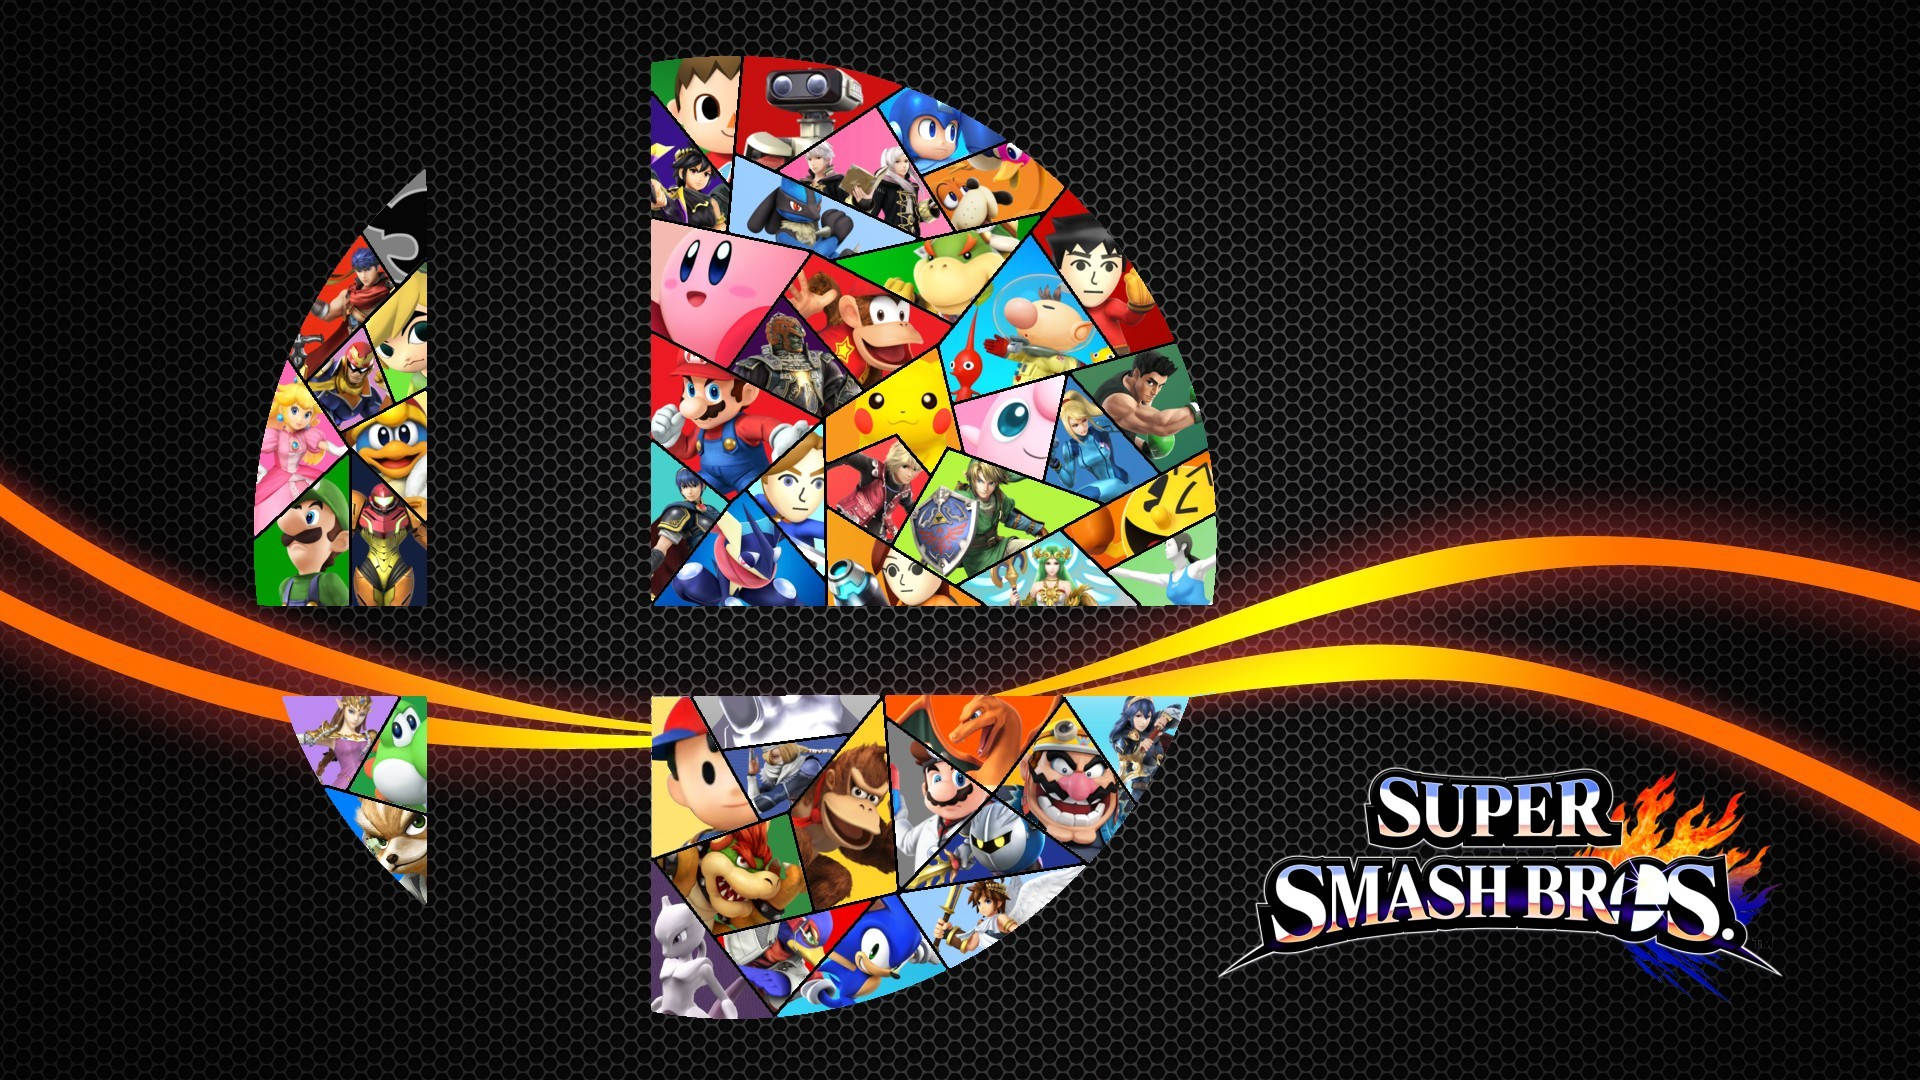 Super Smash Bros 1920X1080 Wallpaper and Background Image